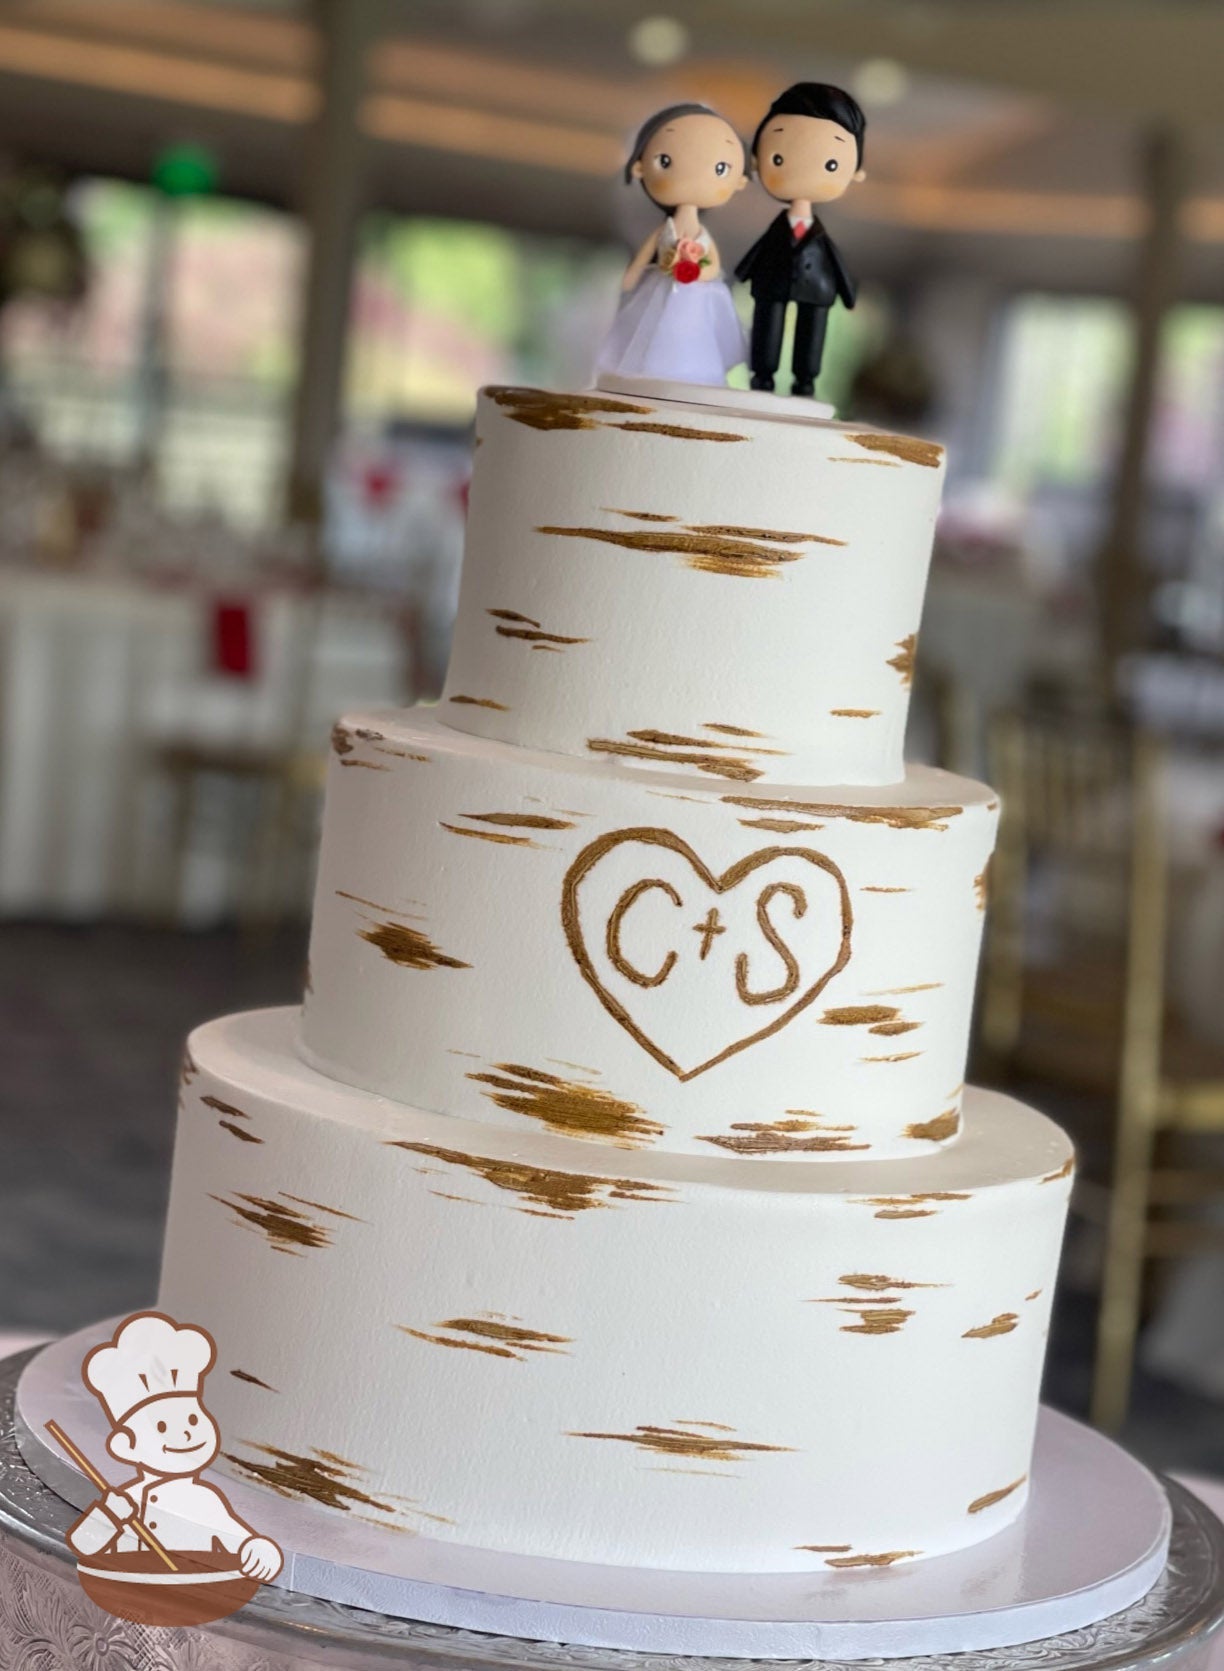 3-tier cake with smooth white icing and decorated with a painted wood grain look and a heart with the initials C + S.